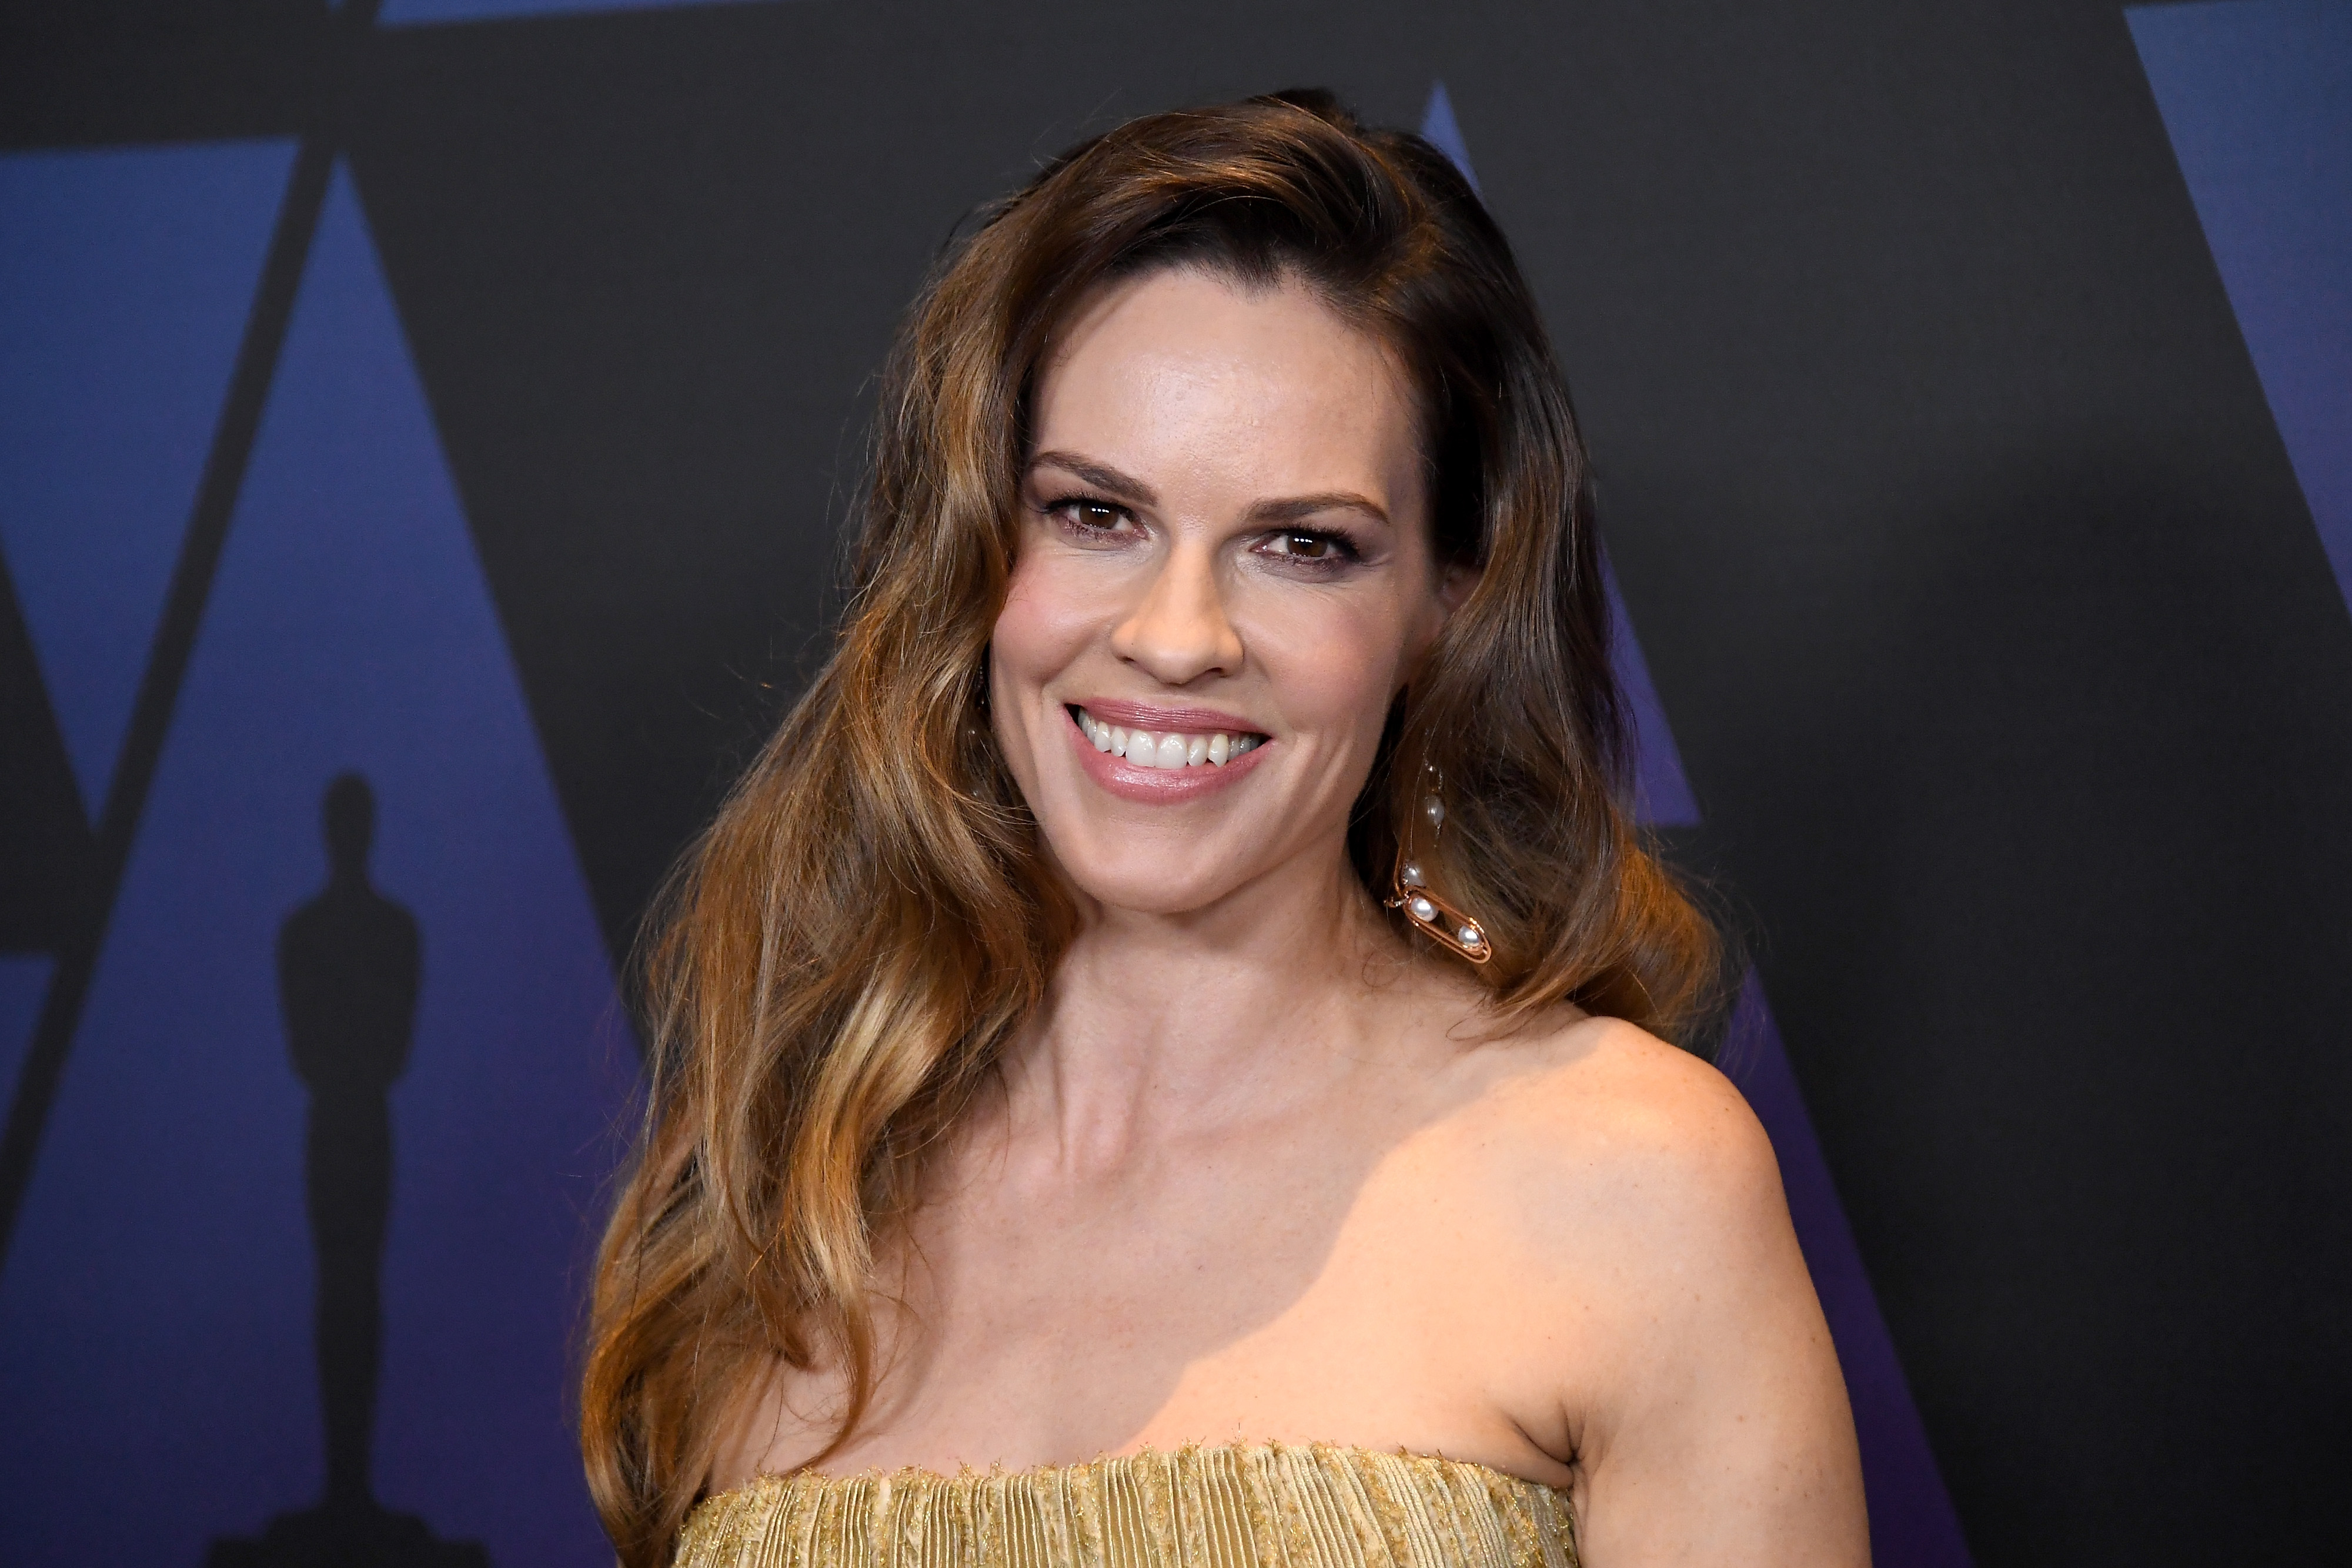 Hilary Swankat the 10th Annual Governors Awards in 2018 in Hollywood | Source: Getty Images